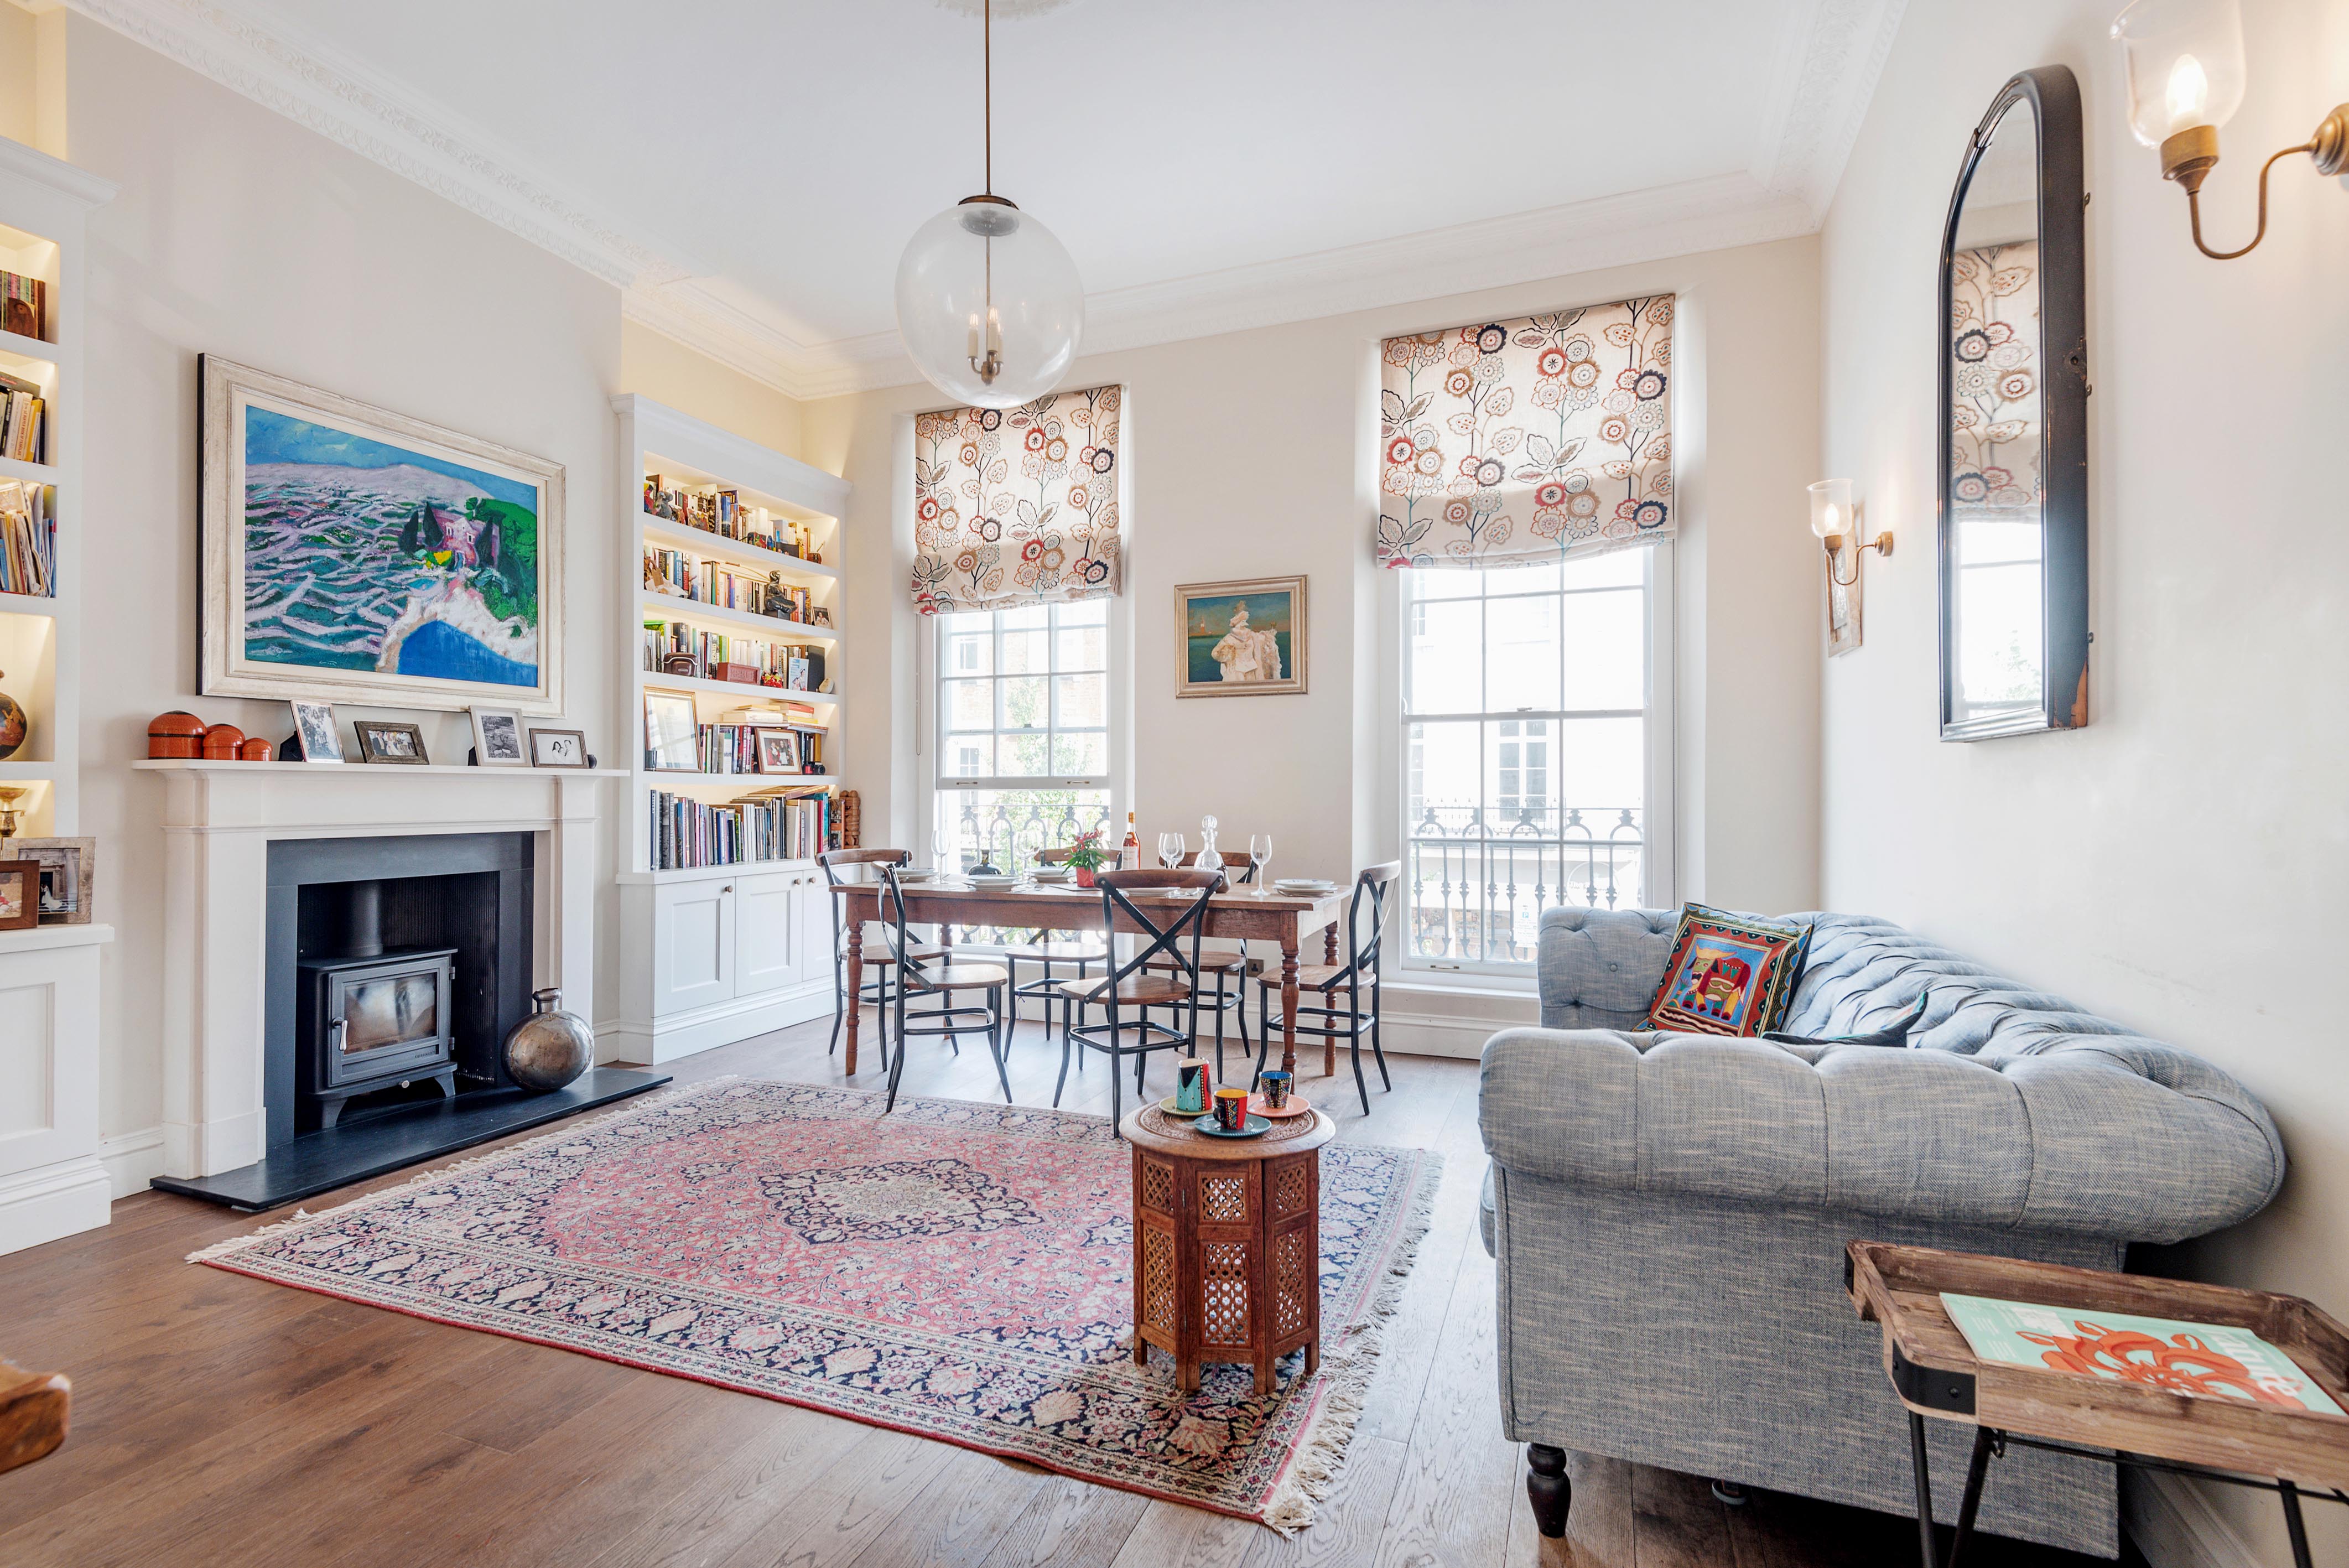 Property Image 1 - Charming Pimlico home close to the River Thames